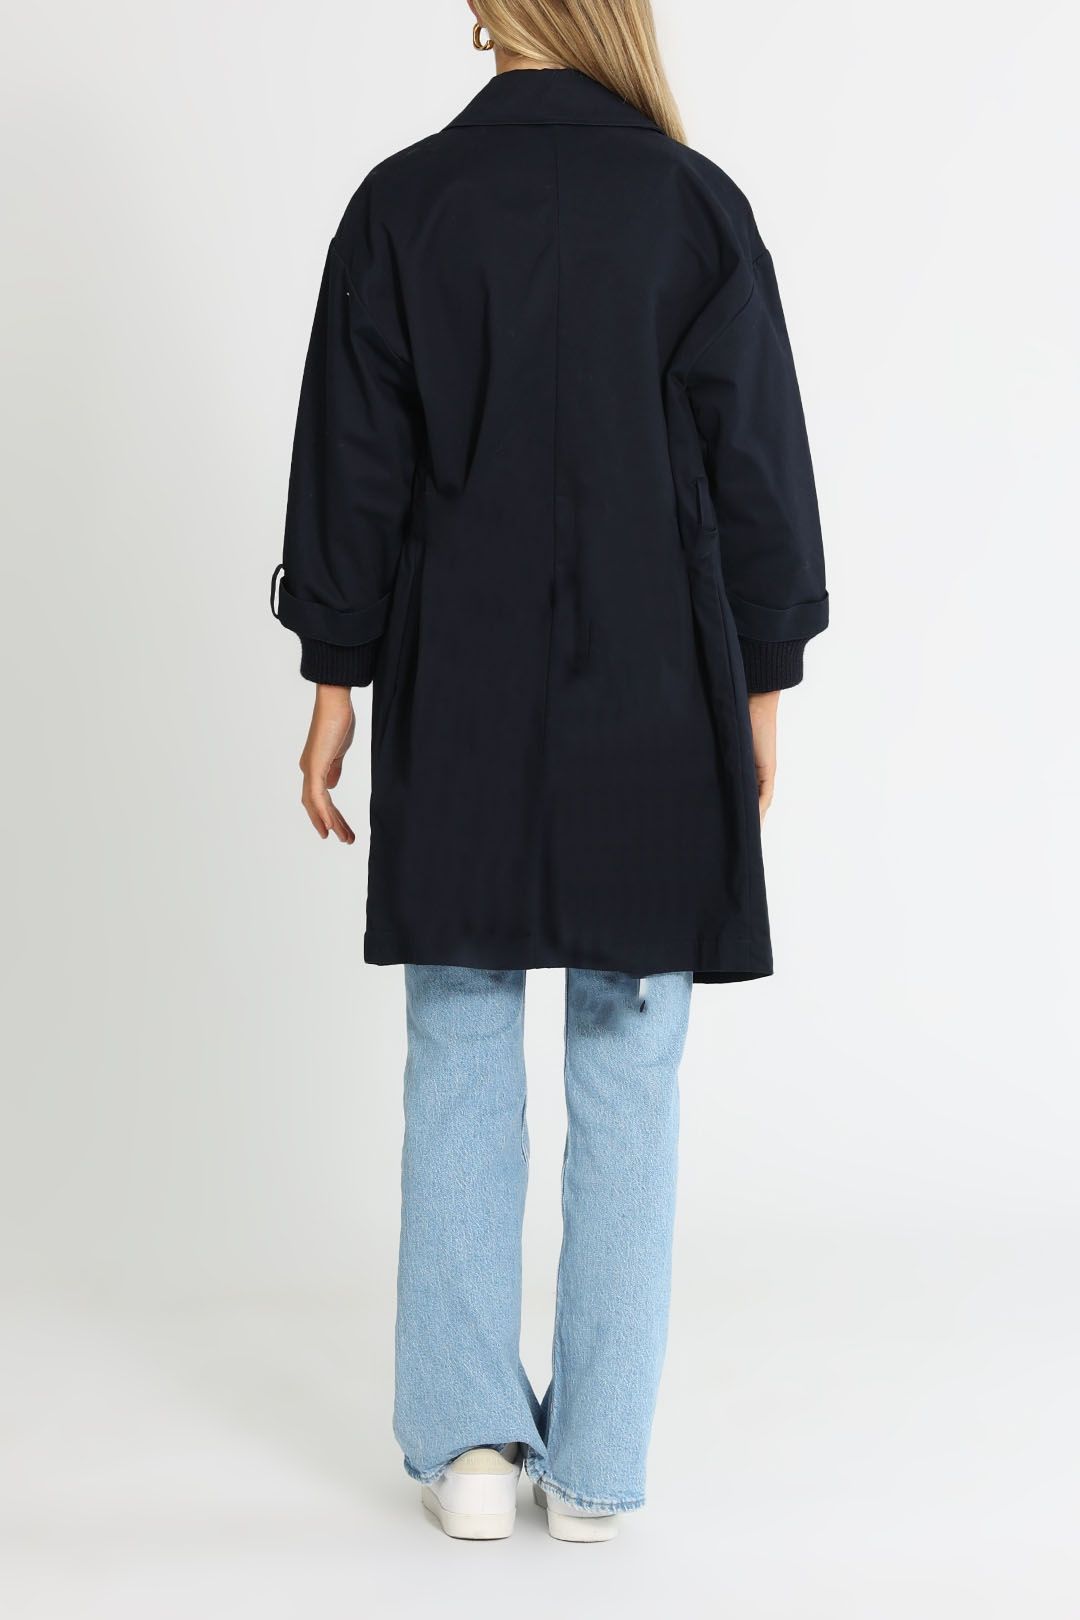 LMND The Ooo Trench Navy Long Sleeves